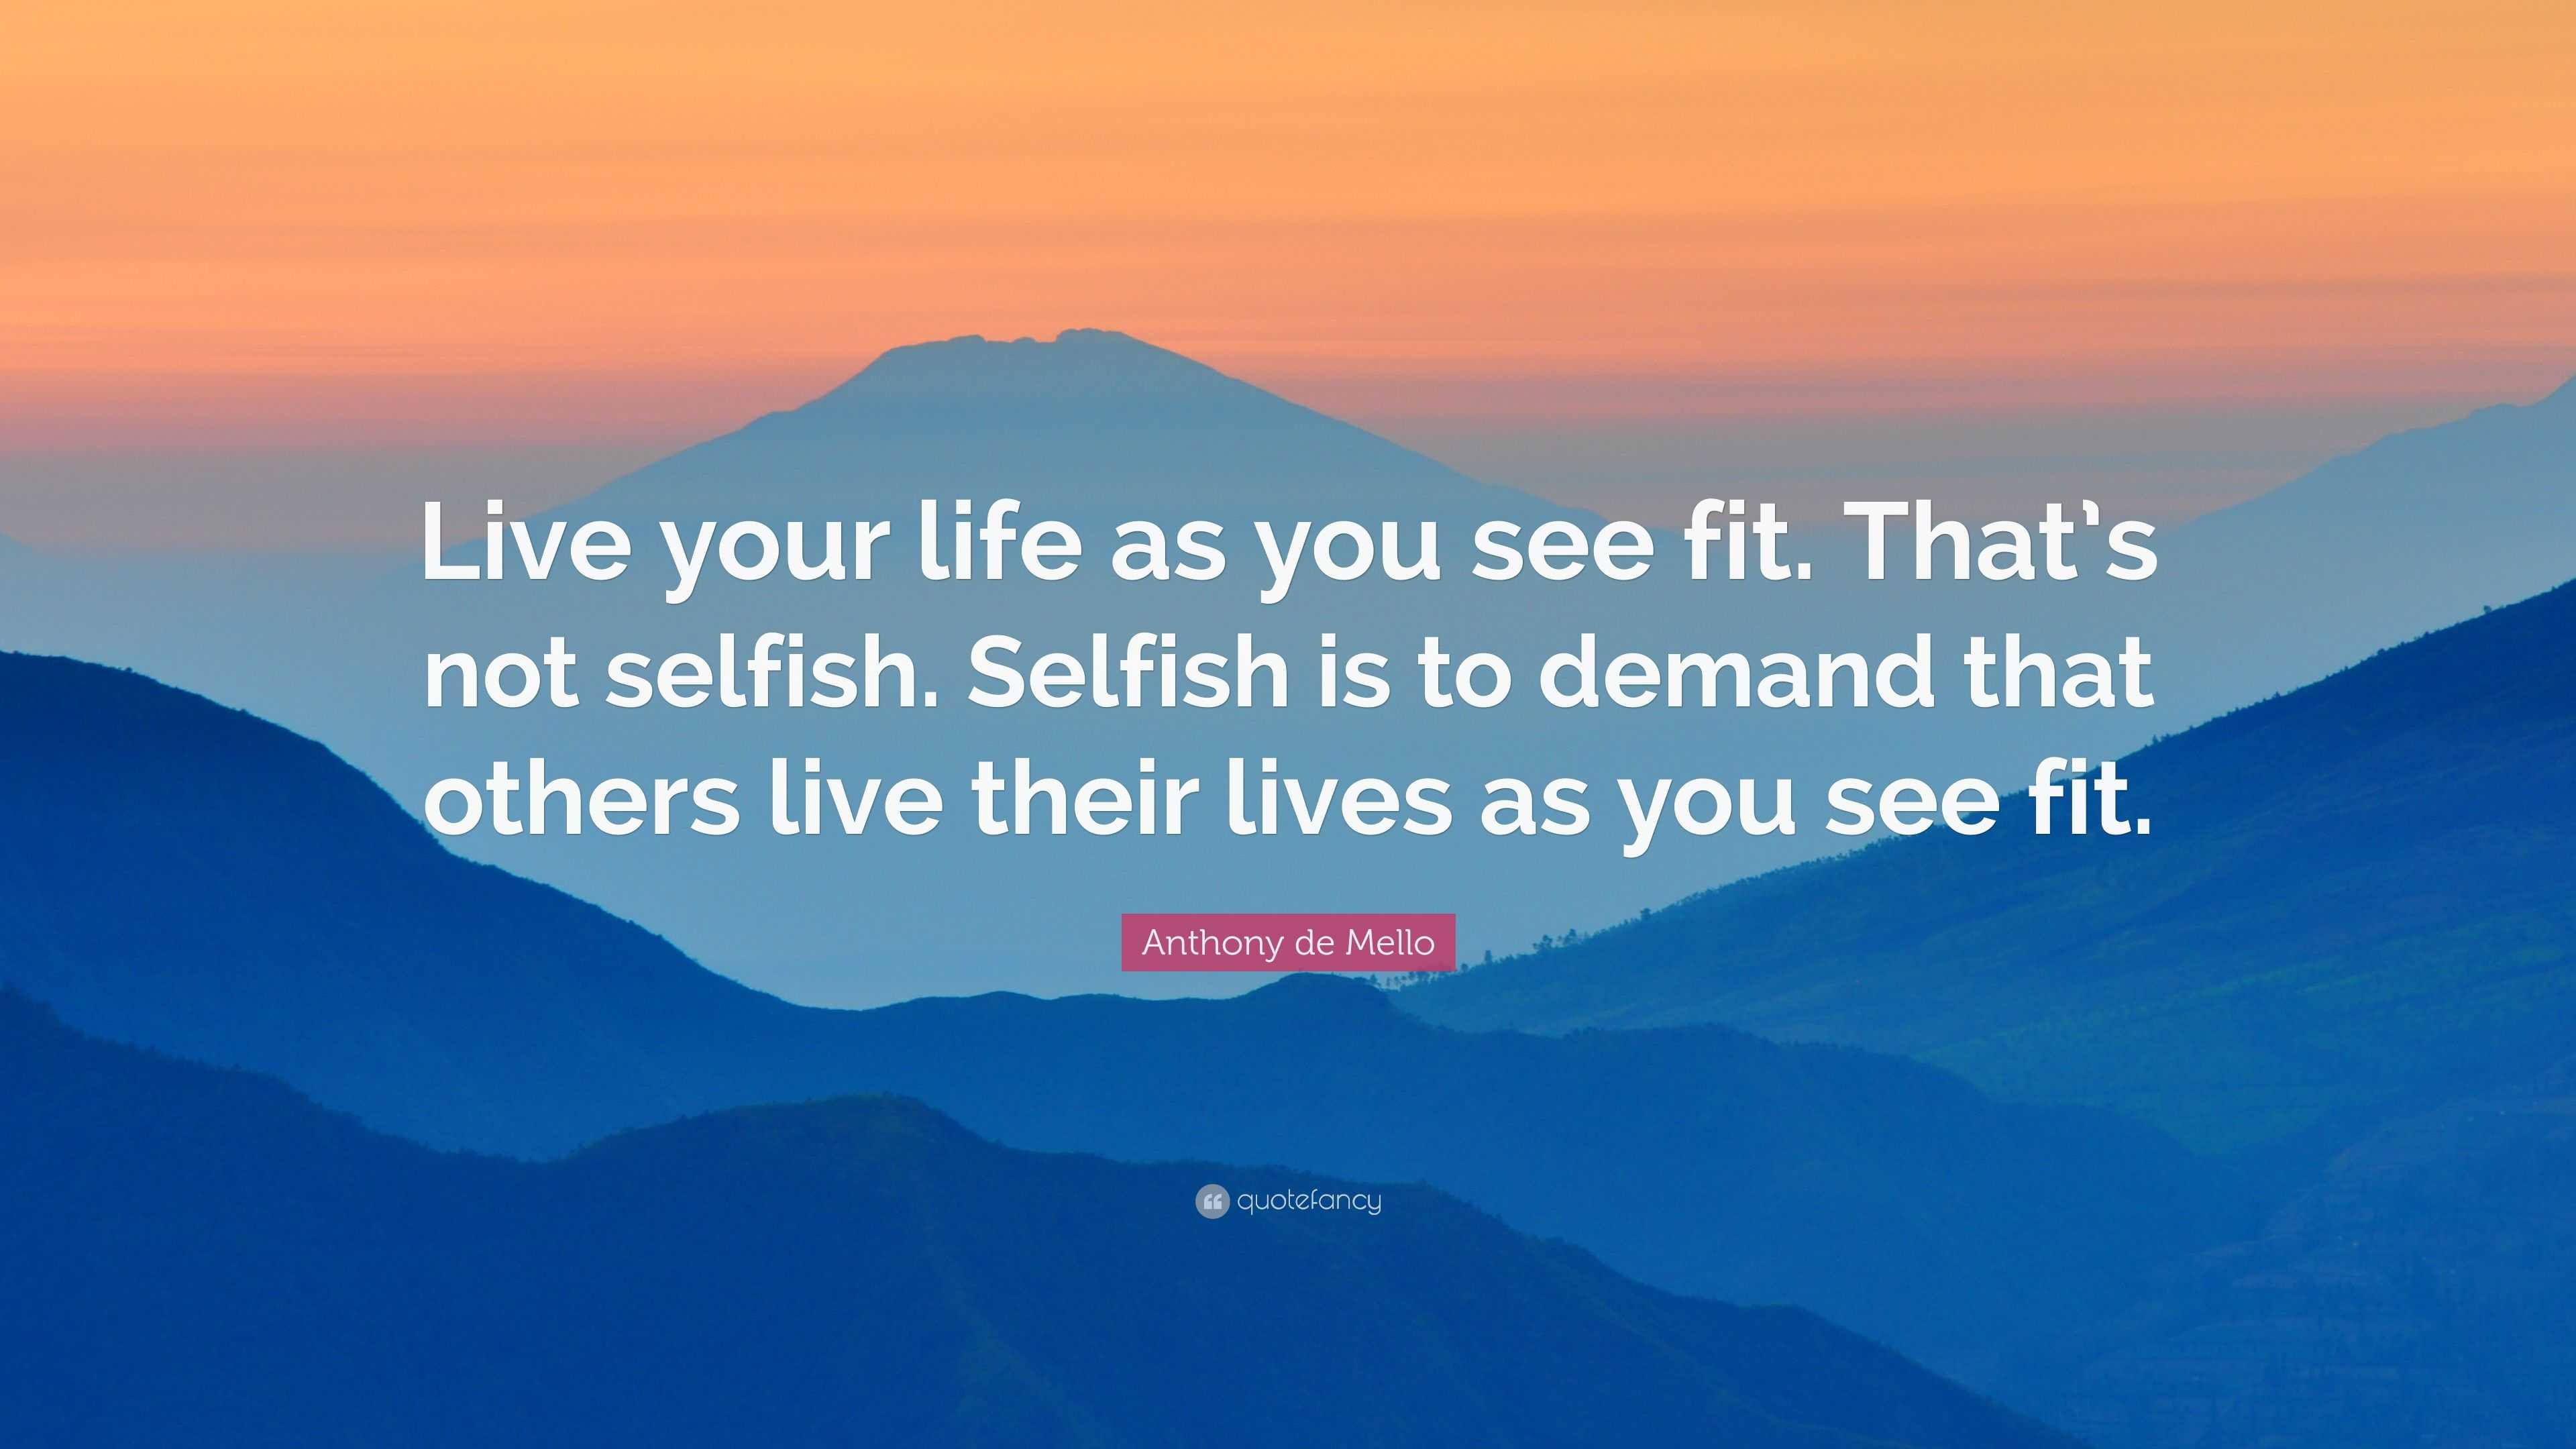 Anthony de Mello Quote “Live your life as you see fit That s not